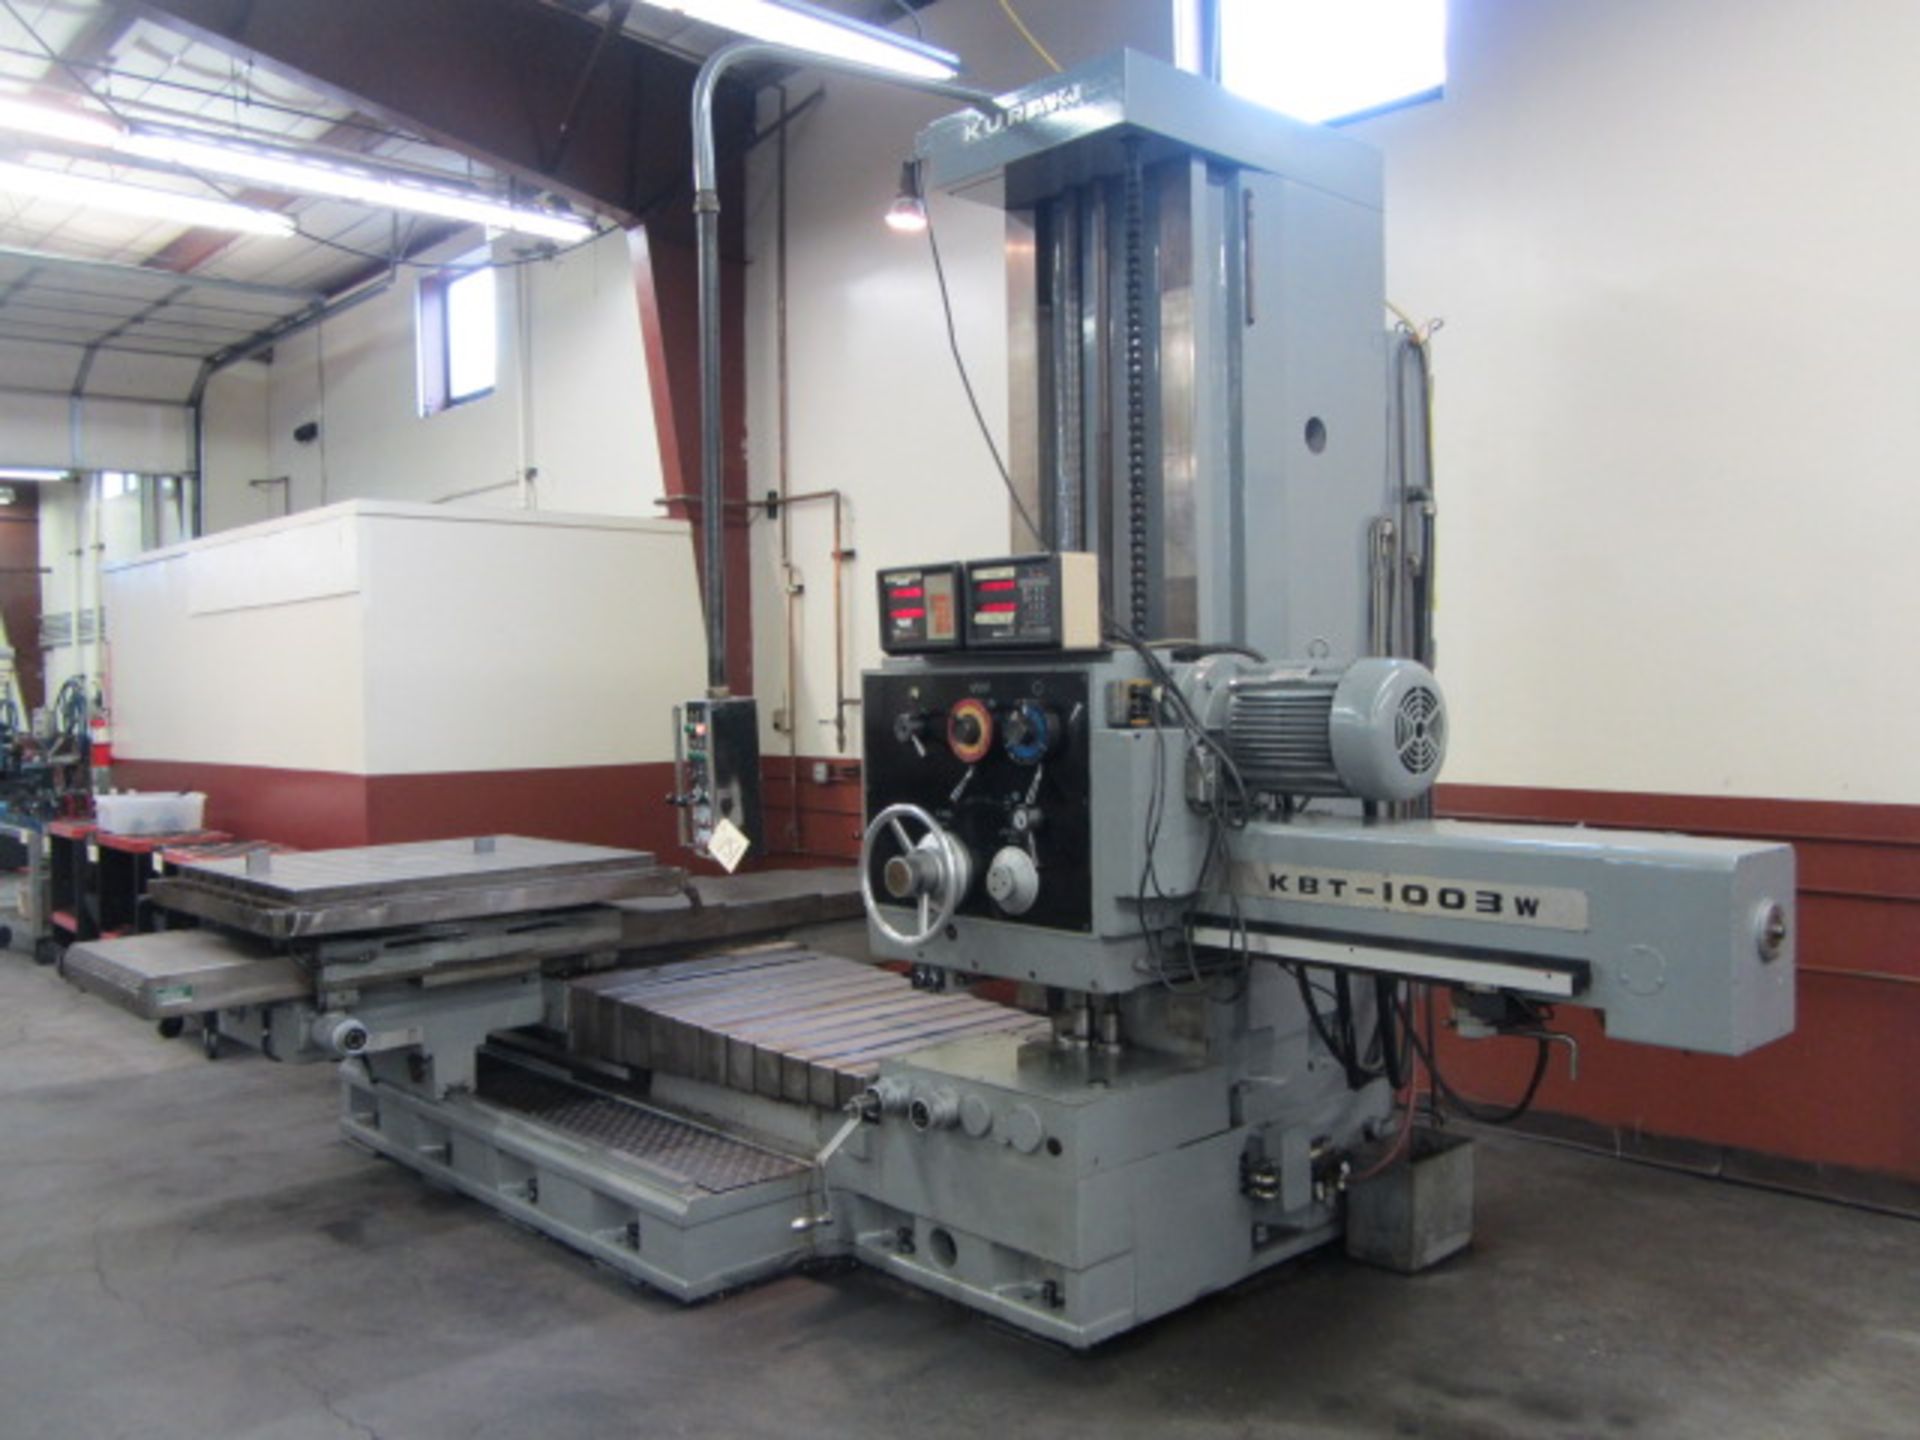 Kuraki Model KBT-1003W 4'' Table Type Horizontal Boring Mill with 41'' x 47'' Rotary Table, Approx - Image 9 of 9